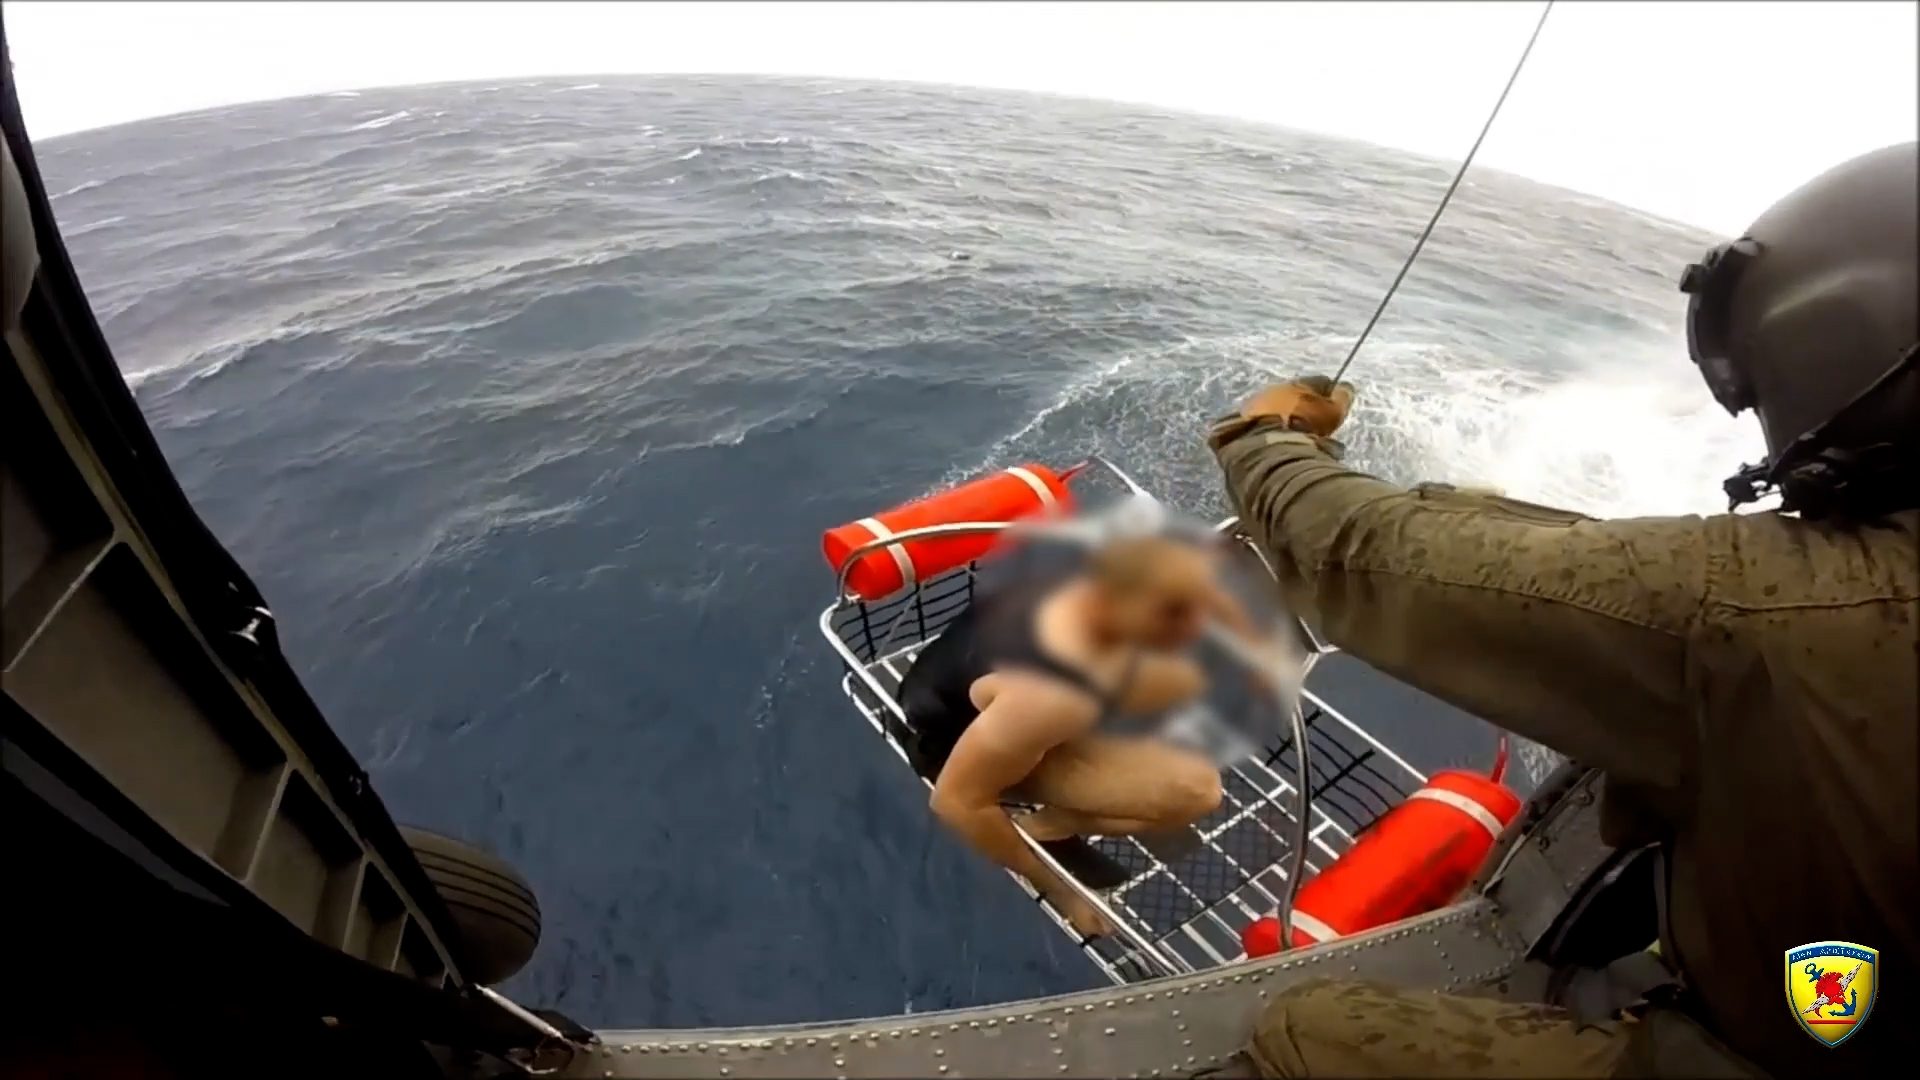 Lesbos Shipwreck: Video of Egyptian Navy Rescue